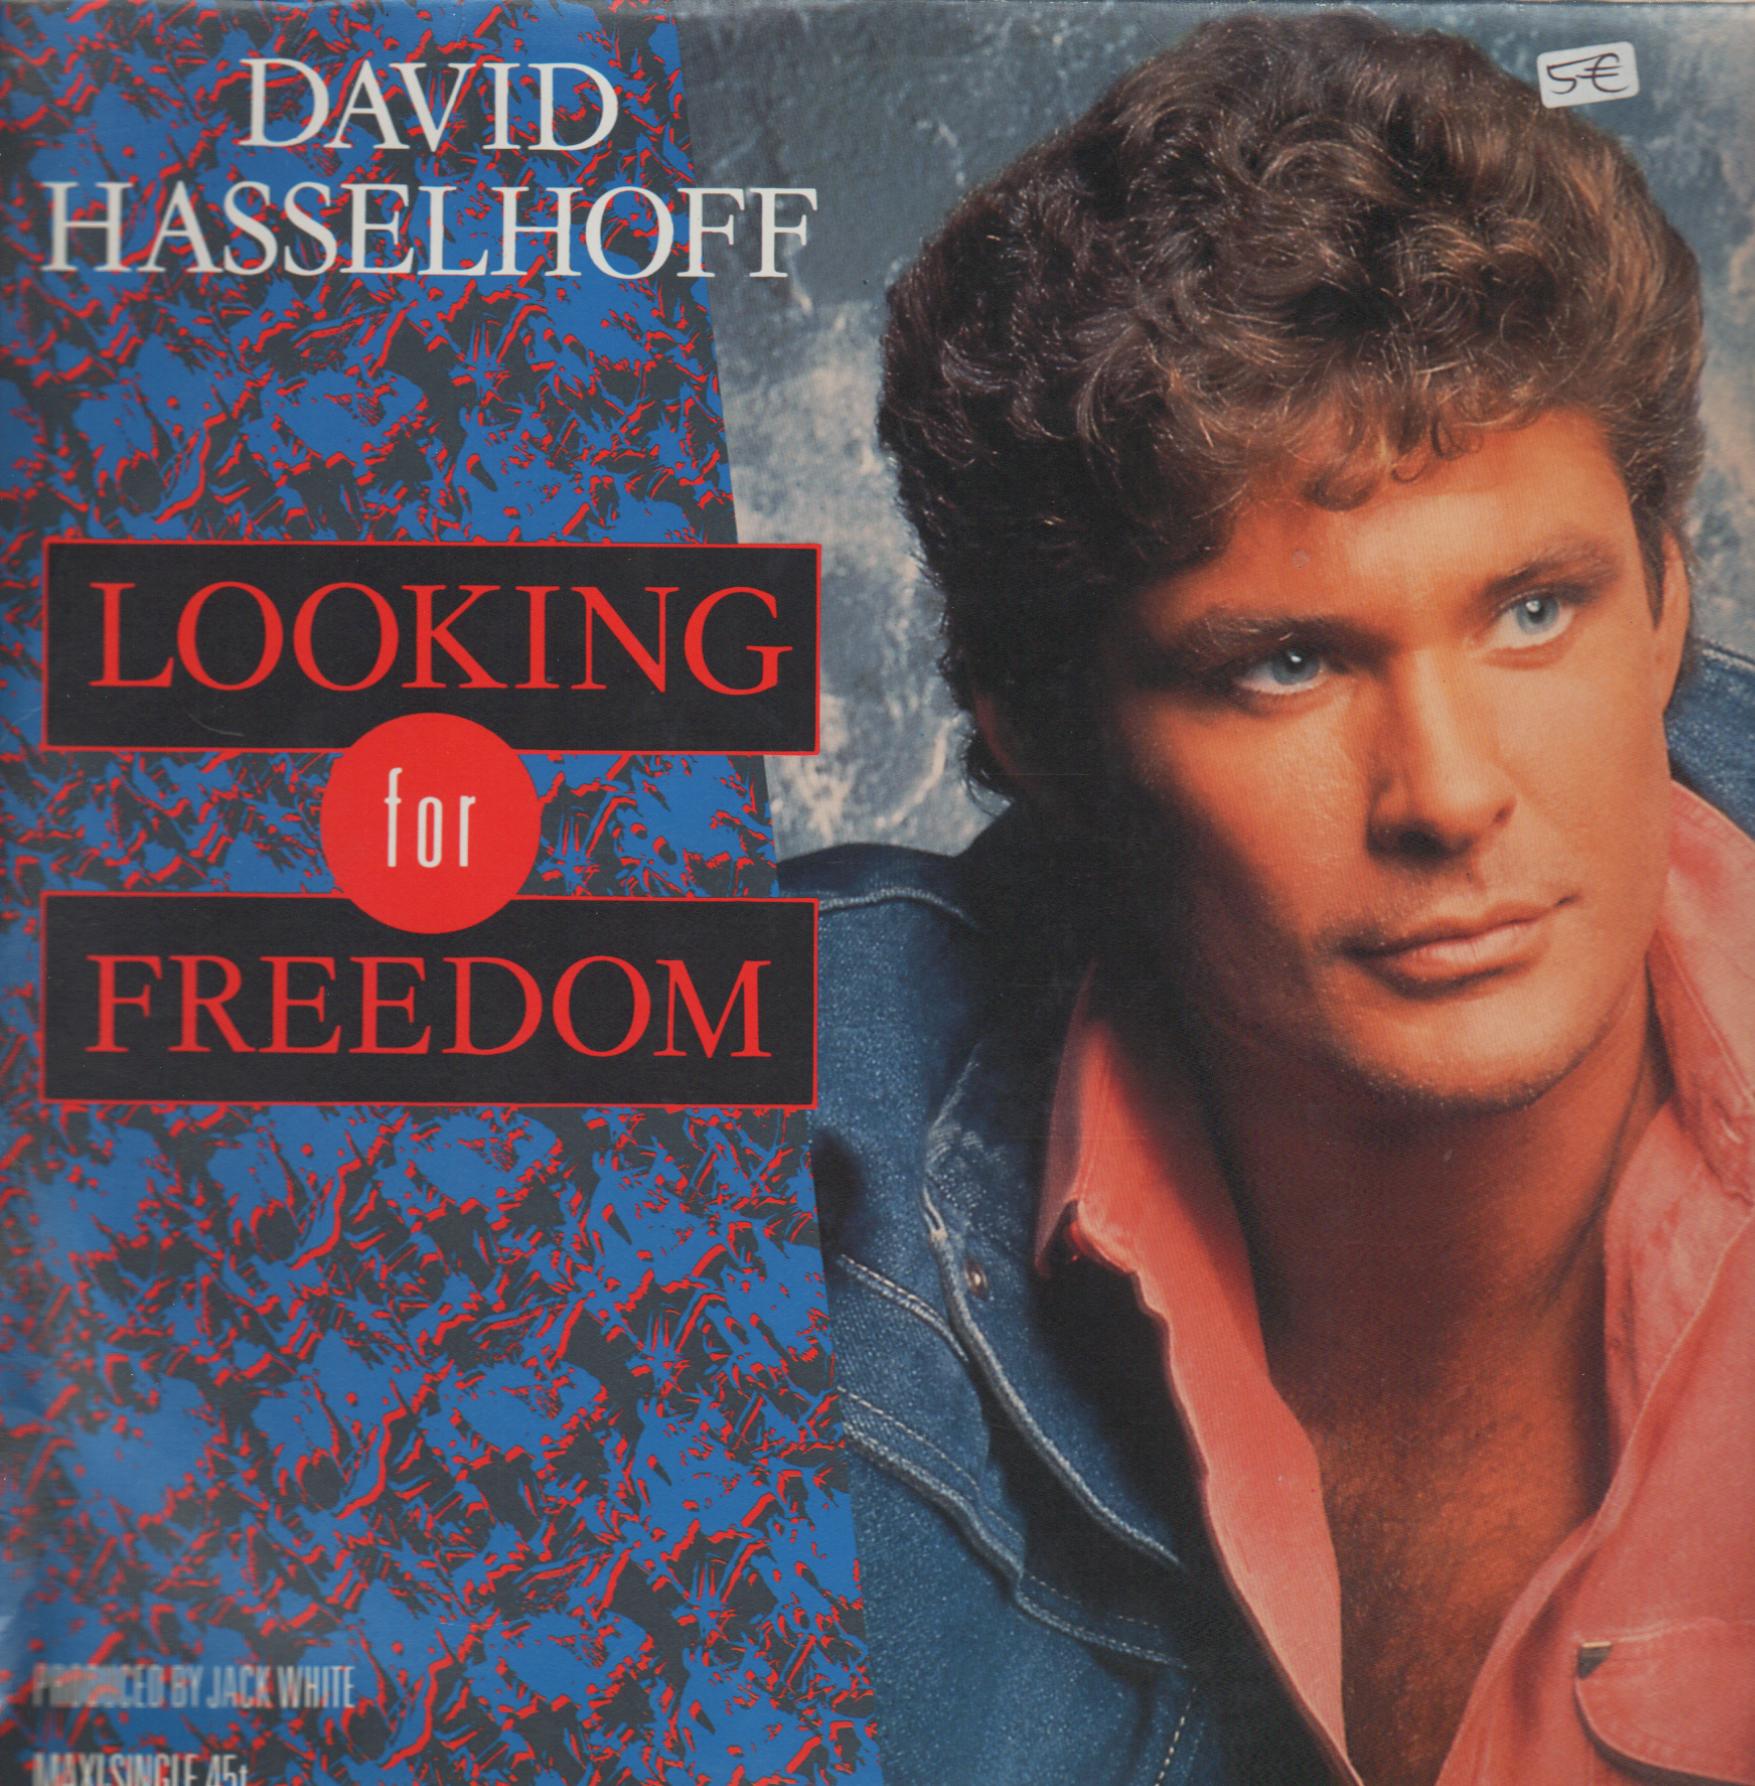 david_hasselhoff-looking_for_freedom(white_records_(3)).jpeg